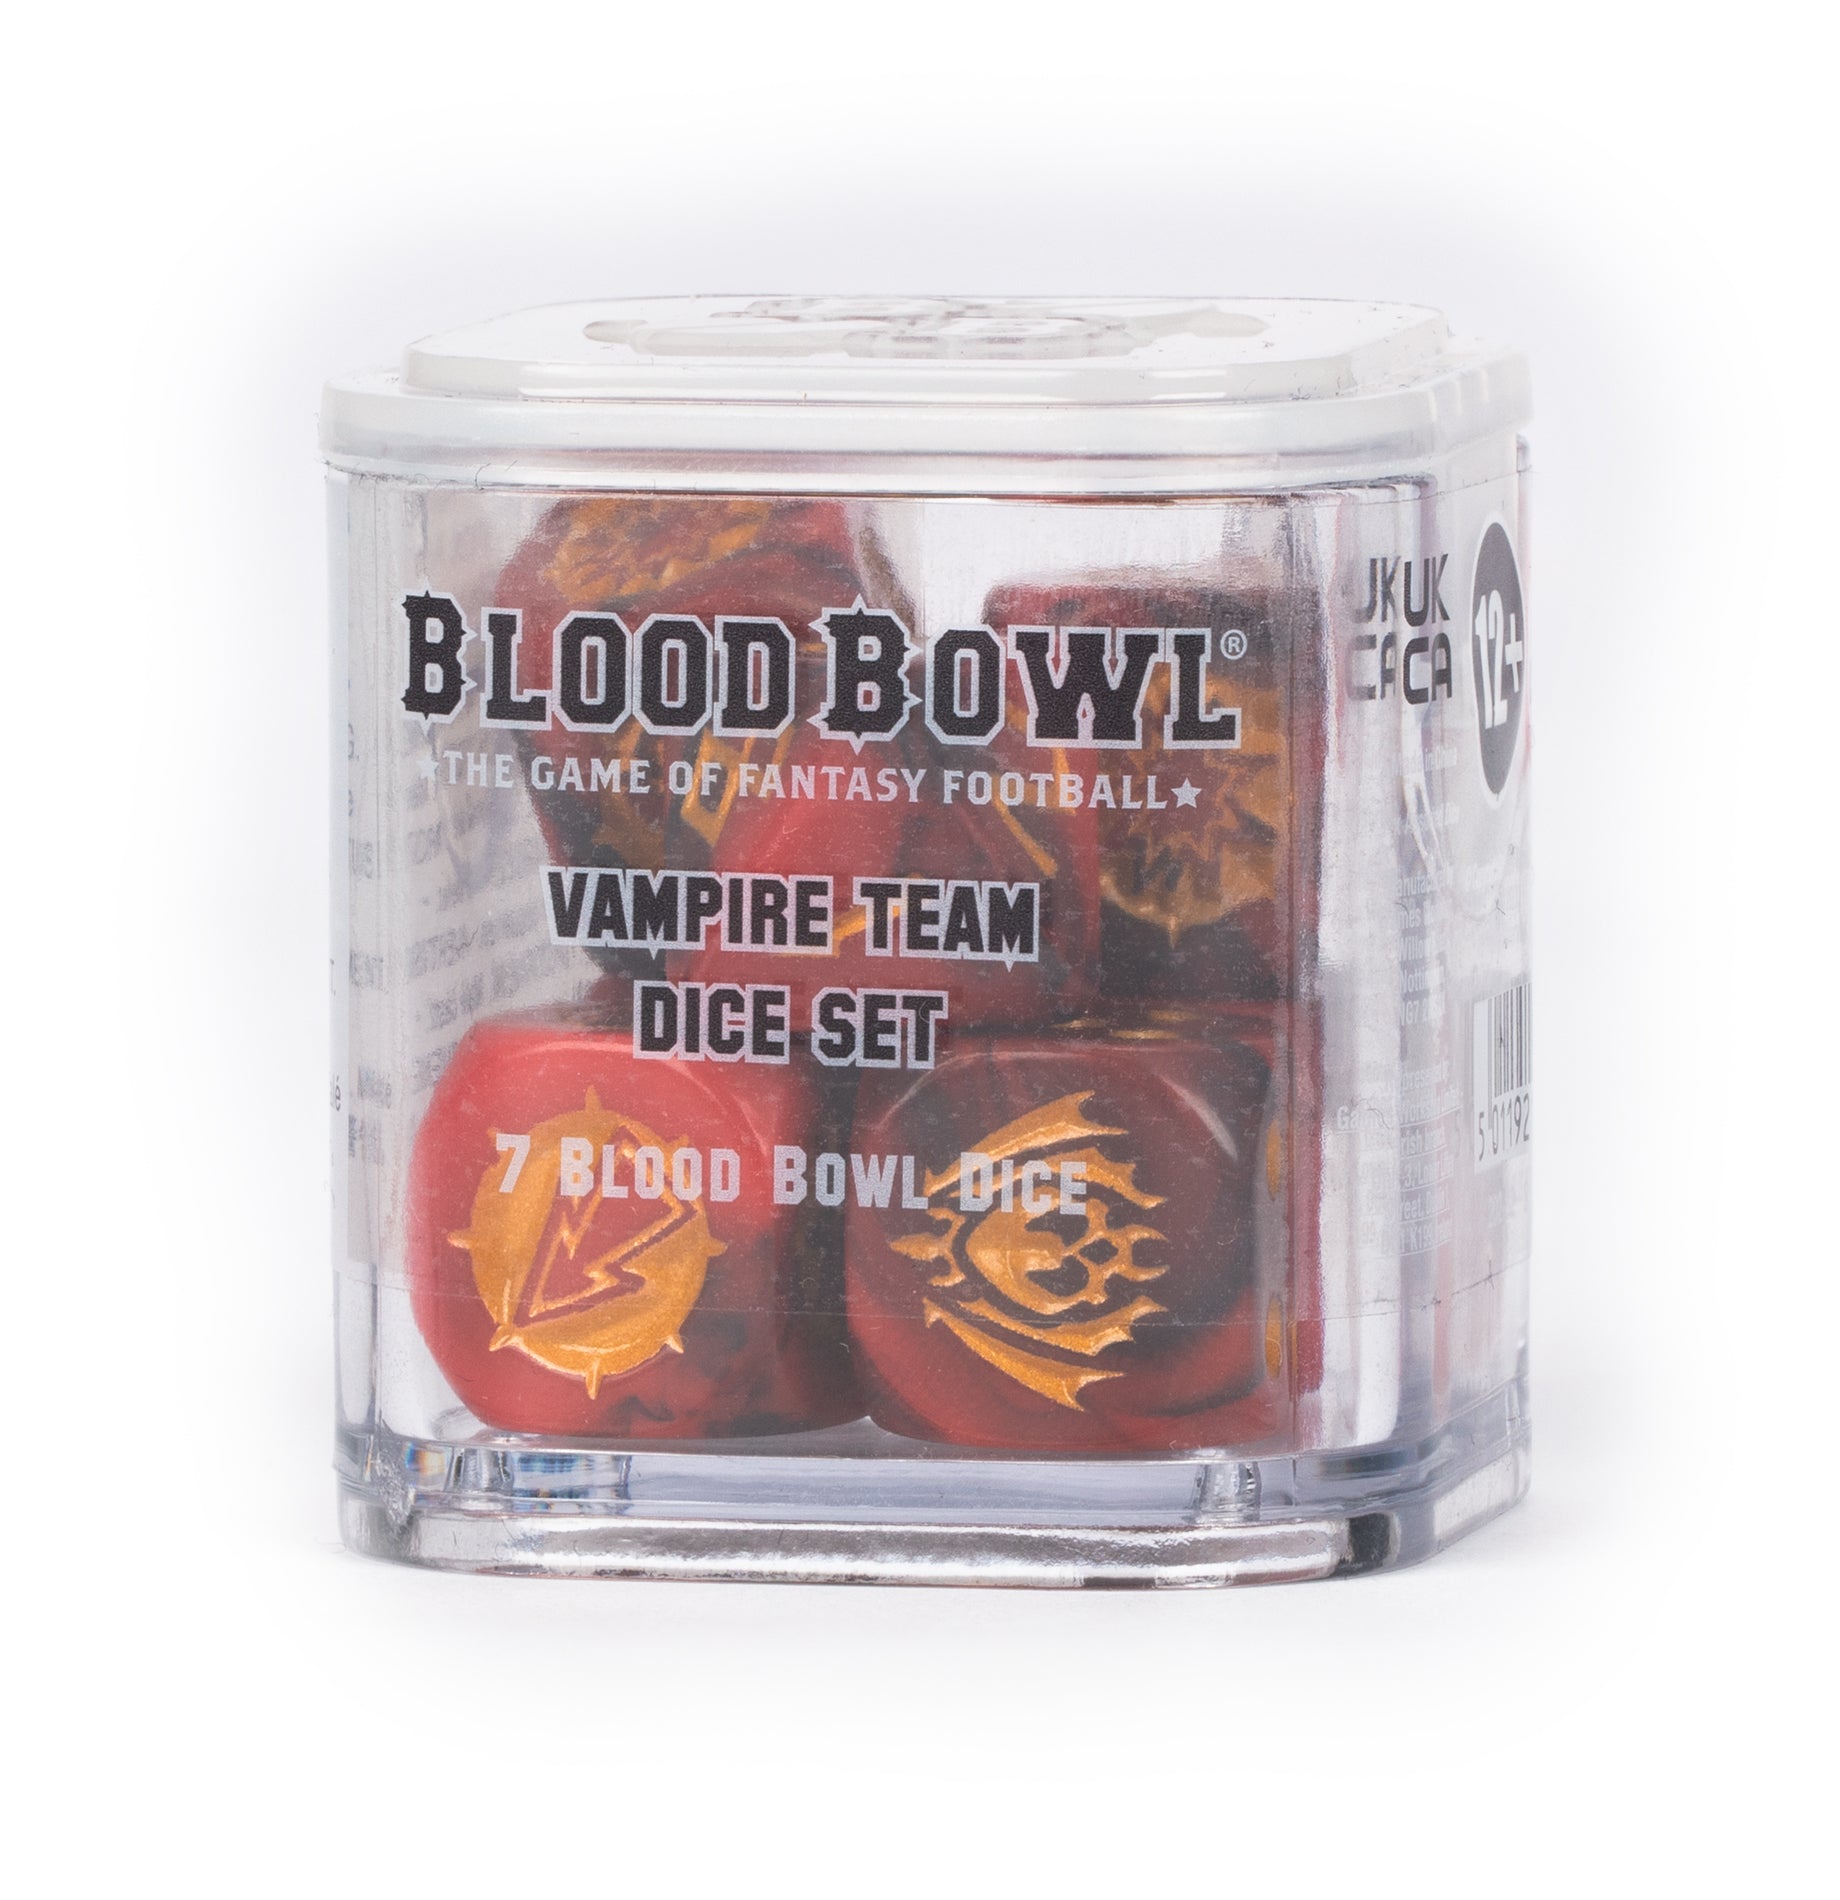 a package of blood bowl vampire team dice set